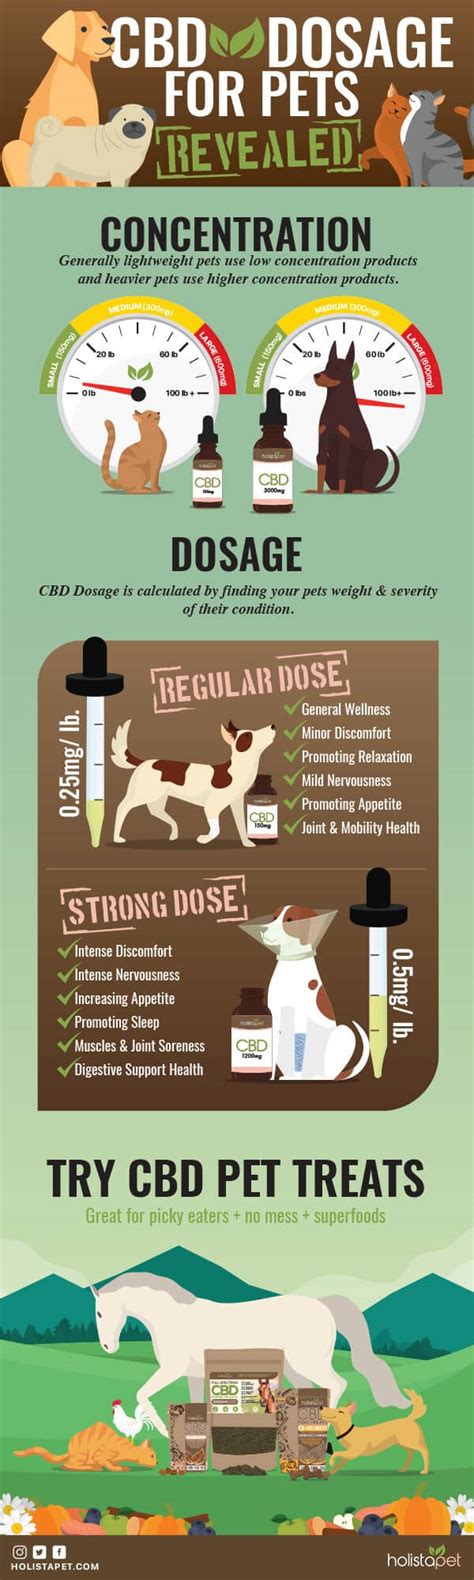  Maintaining their regular routine as much as possible, including their proper daily dose of CBD, will help your dog or cat feel more calm, which will make them less likely to bolt out the door in fear